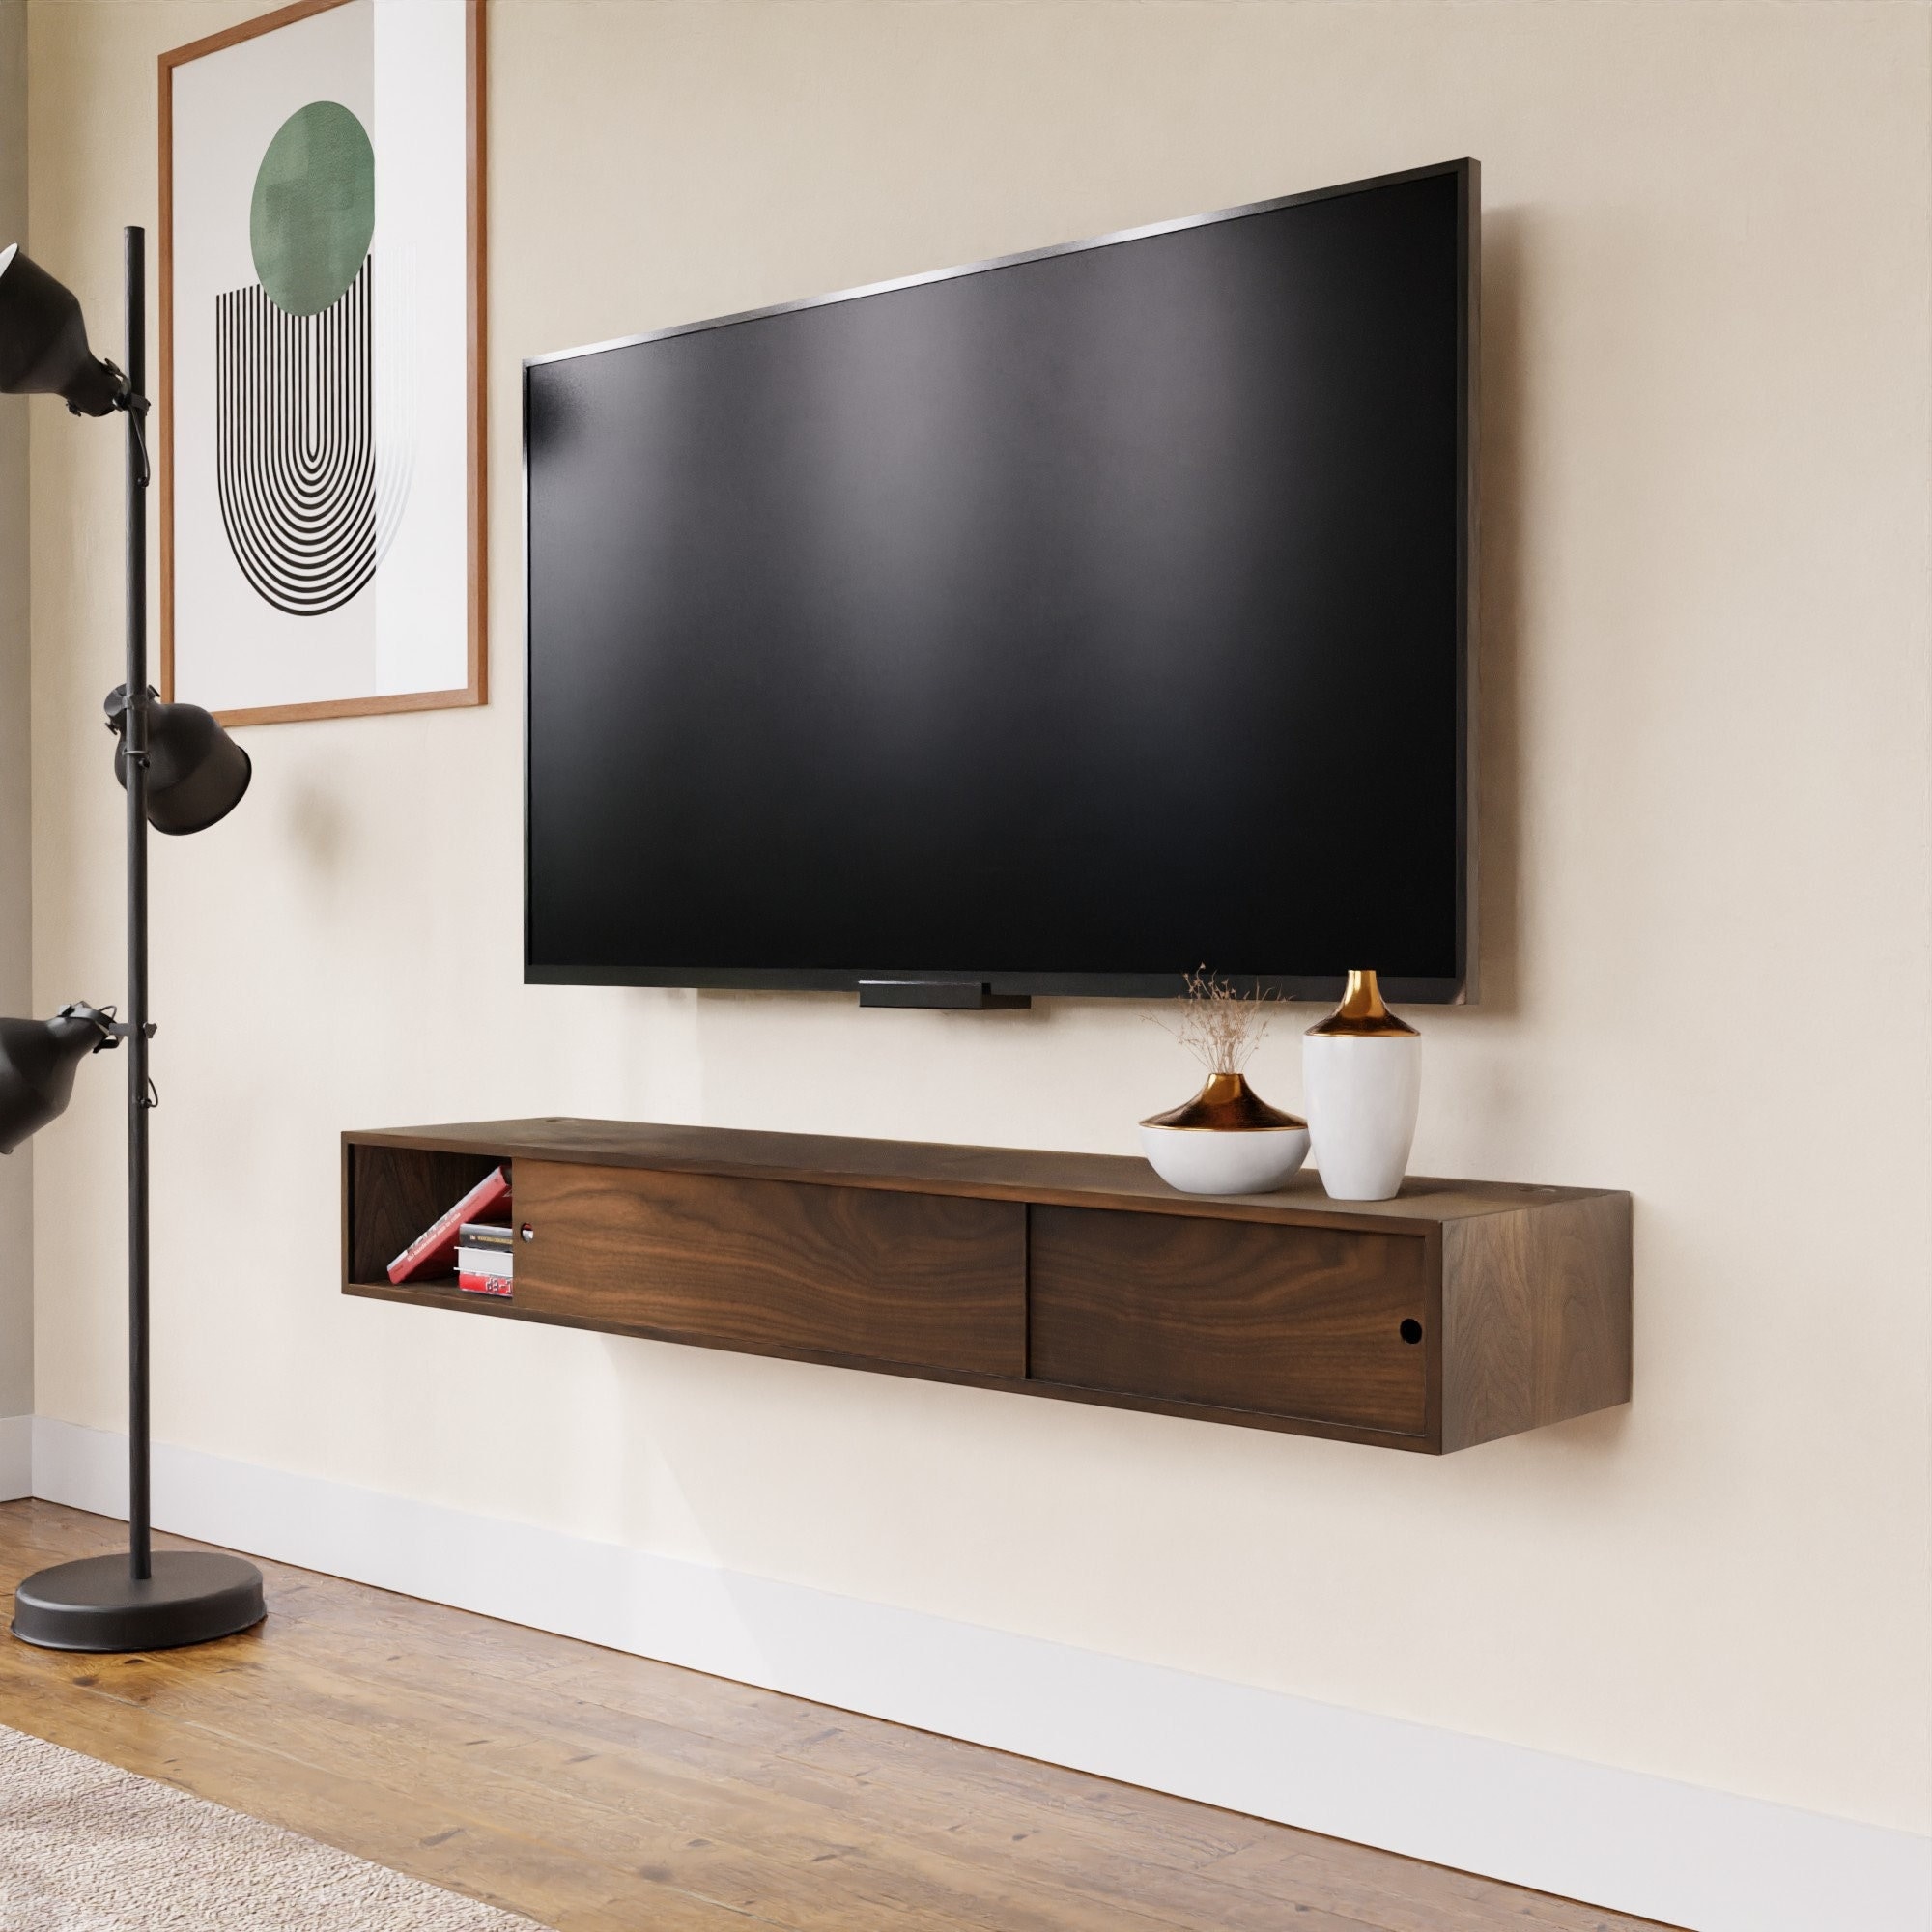 Walnut Floating TV Stand Media Console With Sliding Doors TV pic